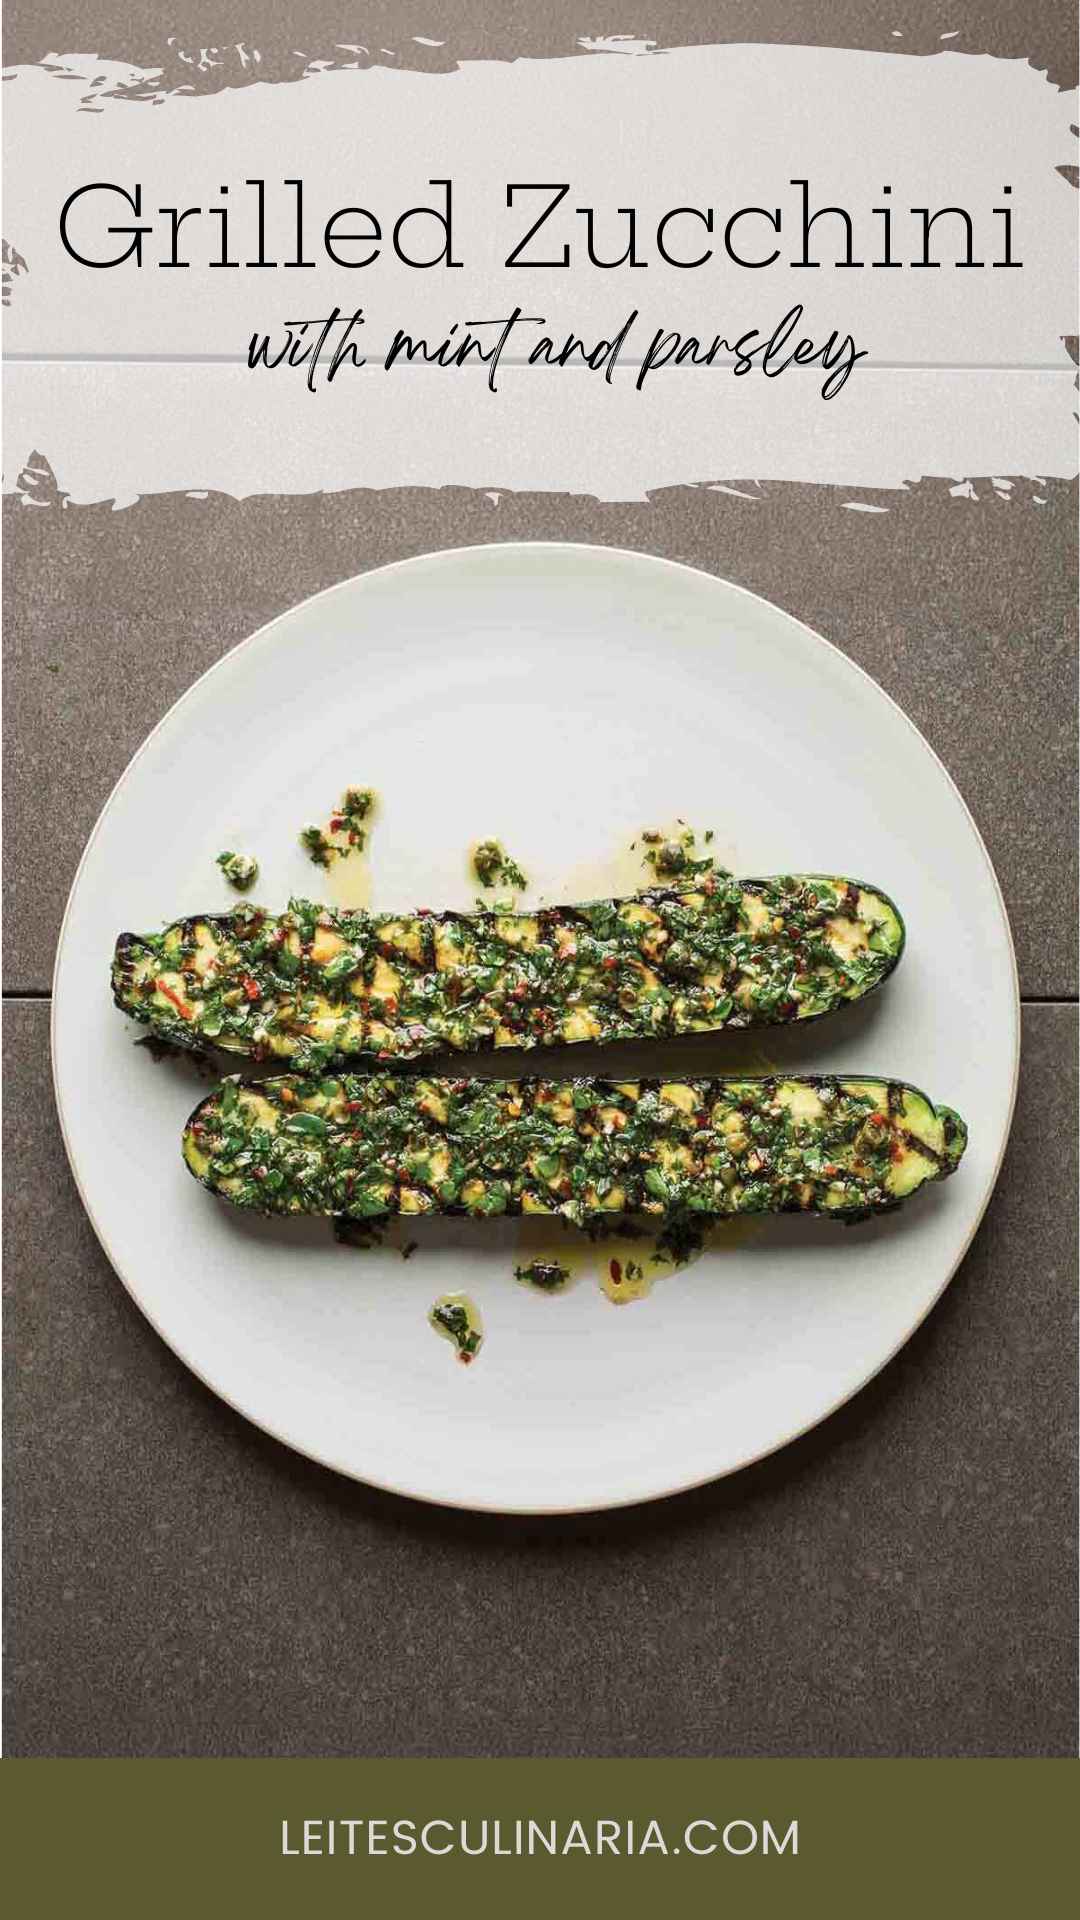 Two grilled zucchini halves topped with mint salsa on a white plate.